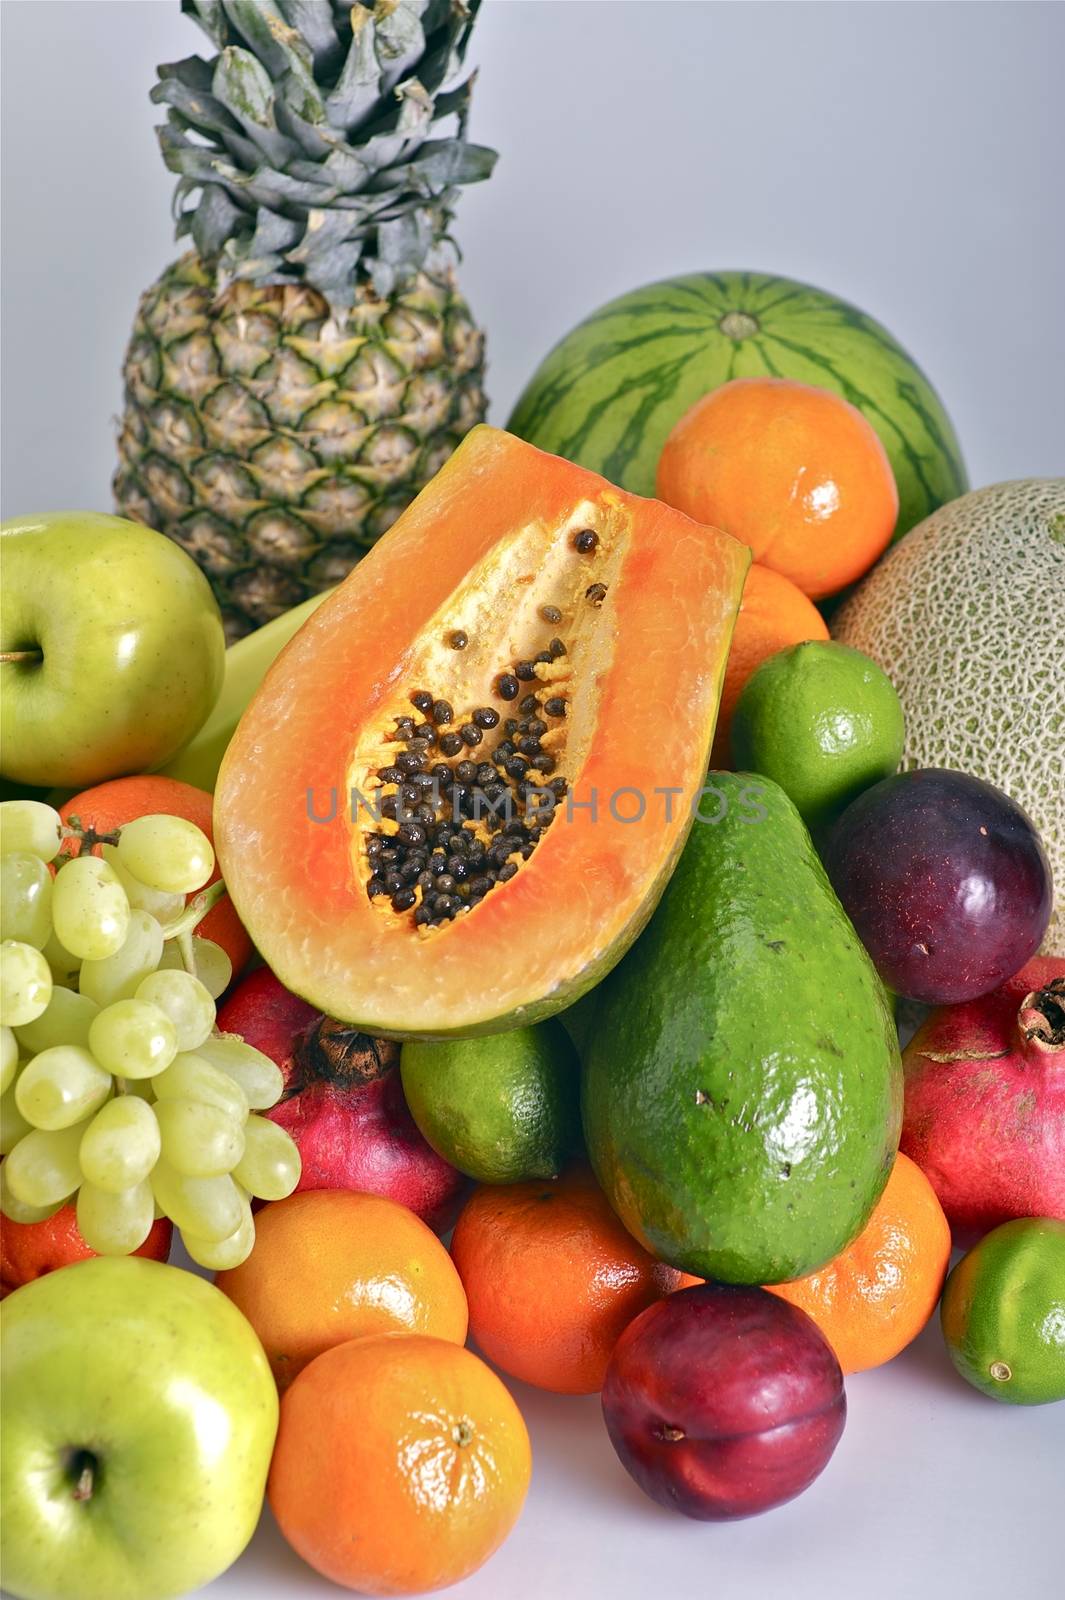 Fruits Pile. Vertical Photo of Many Types of Fruits Like Pineapple, Papaya, Grapes, Apples, Plums and More. Fruits Photo Collection.